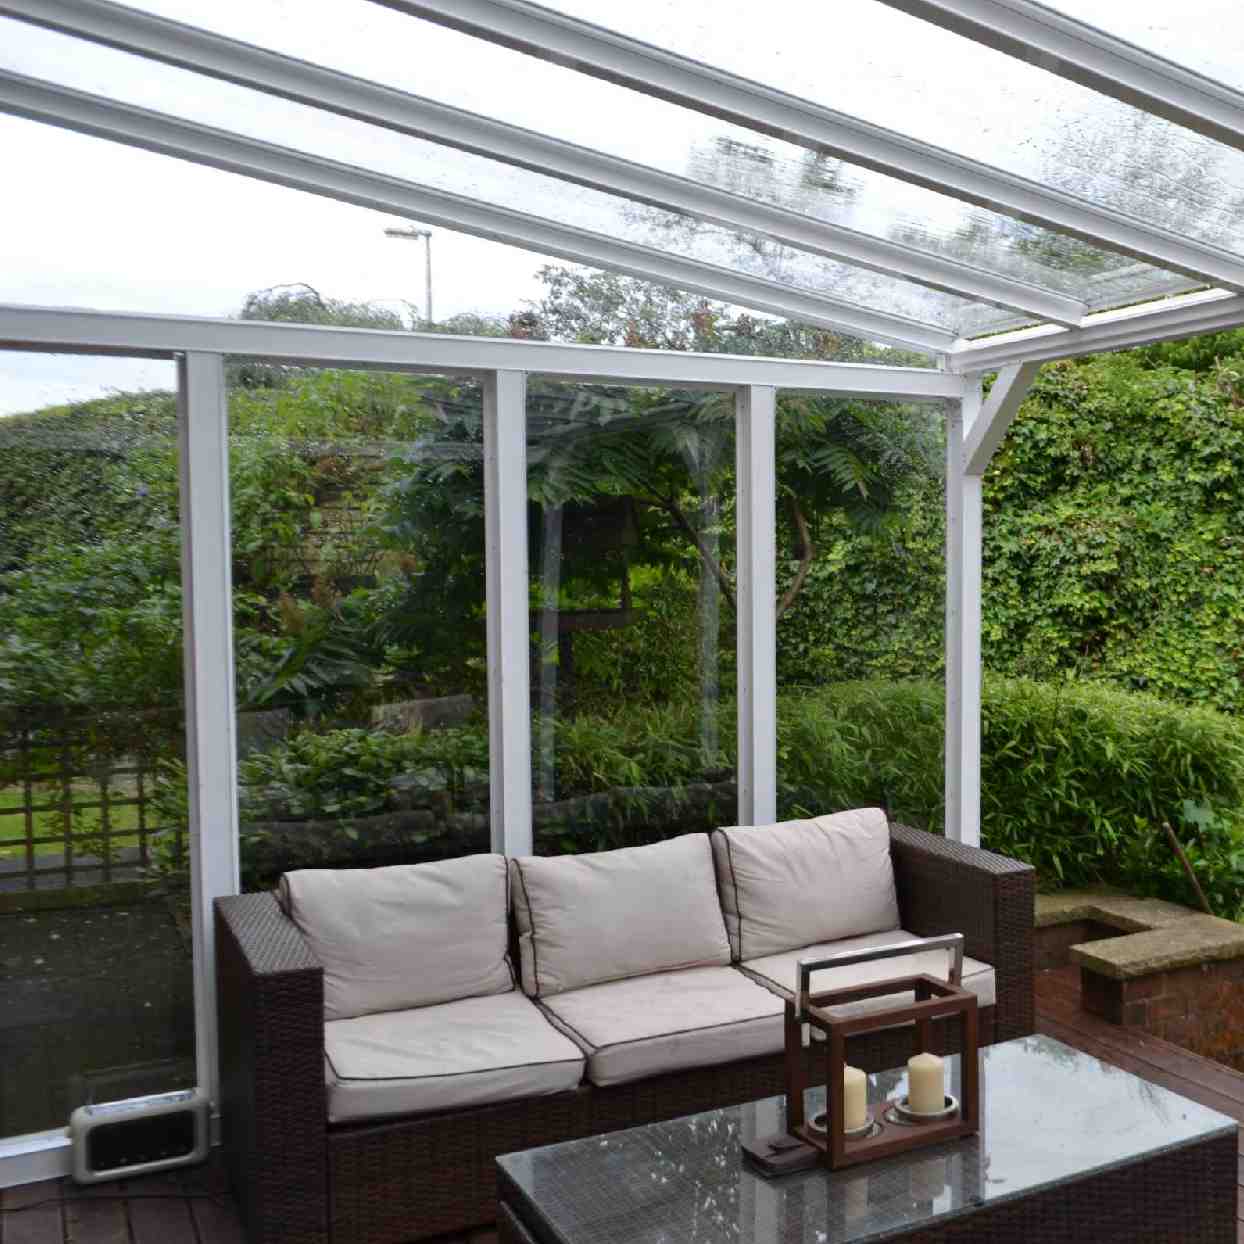 Buy Omega Verandah White with 16mm Polycarbonate Glazing - 8.4m (W) x 3.0m (P), (4) Supporting Posts online today